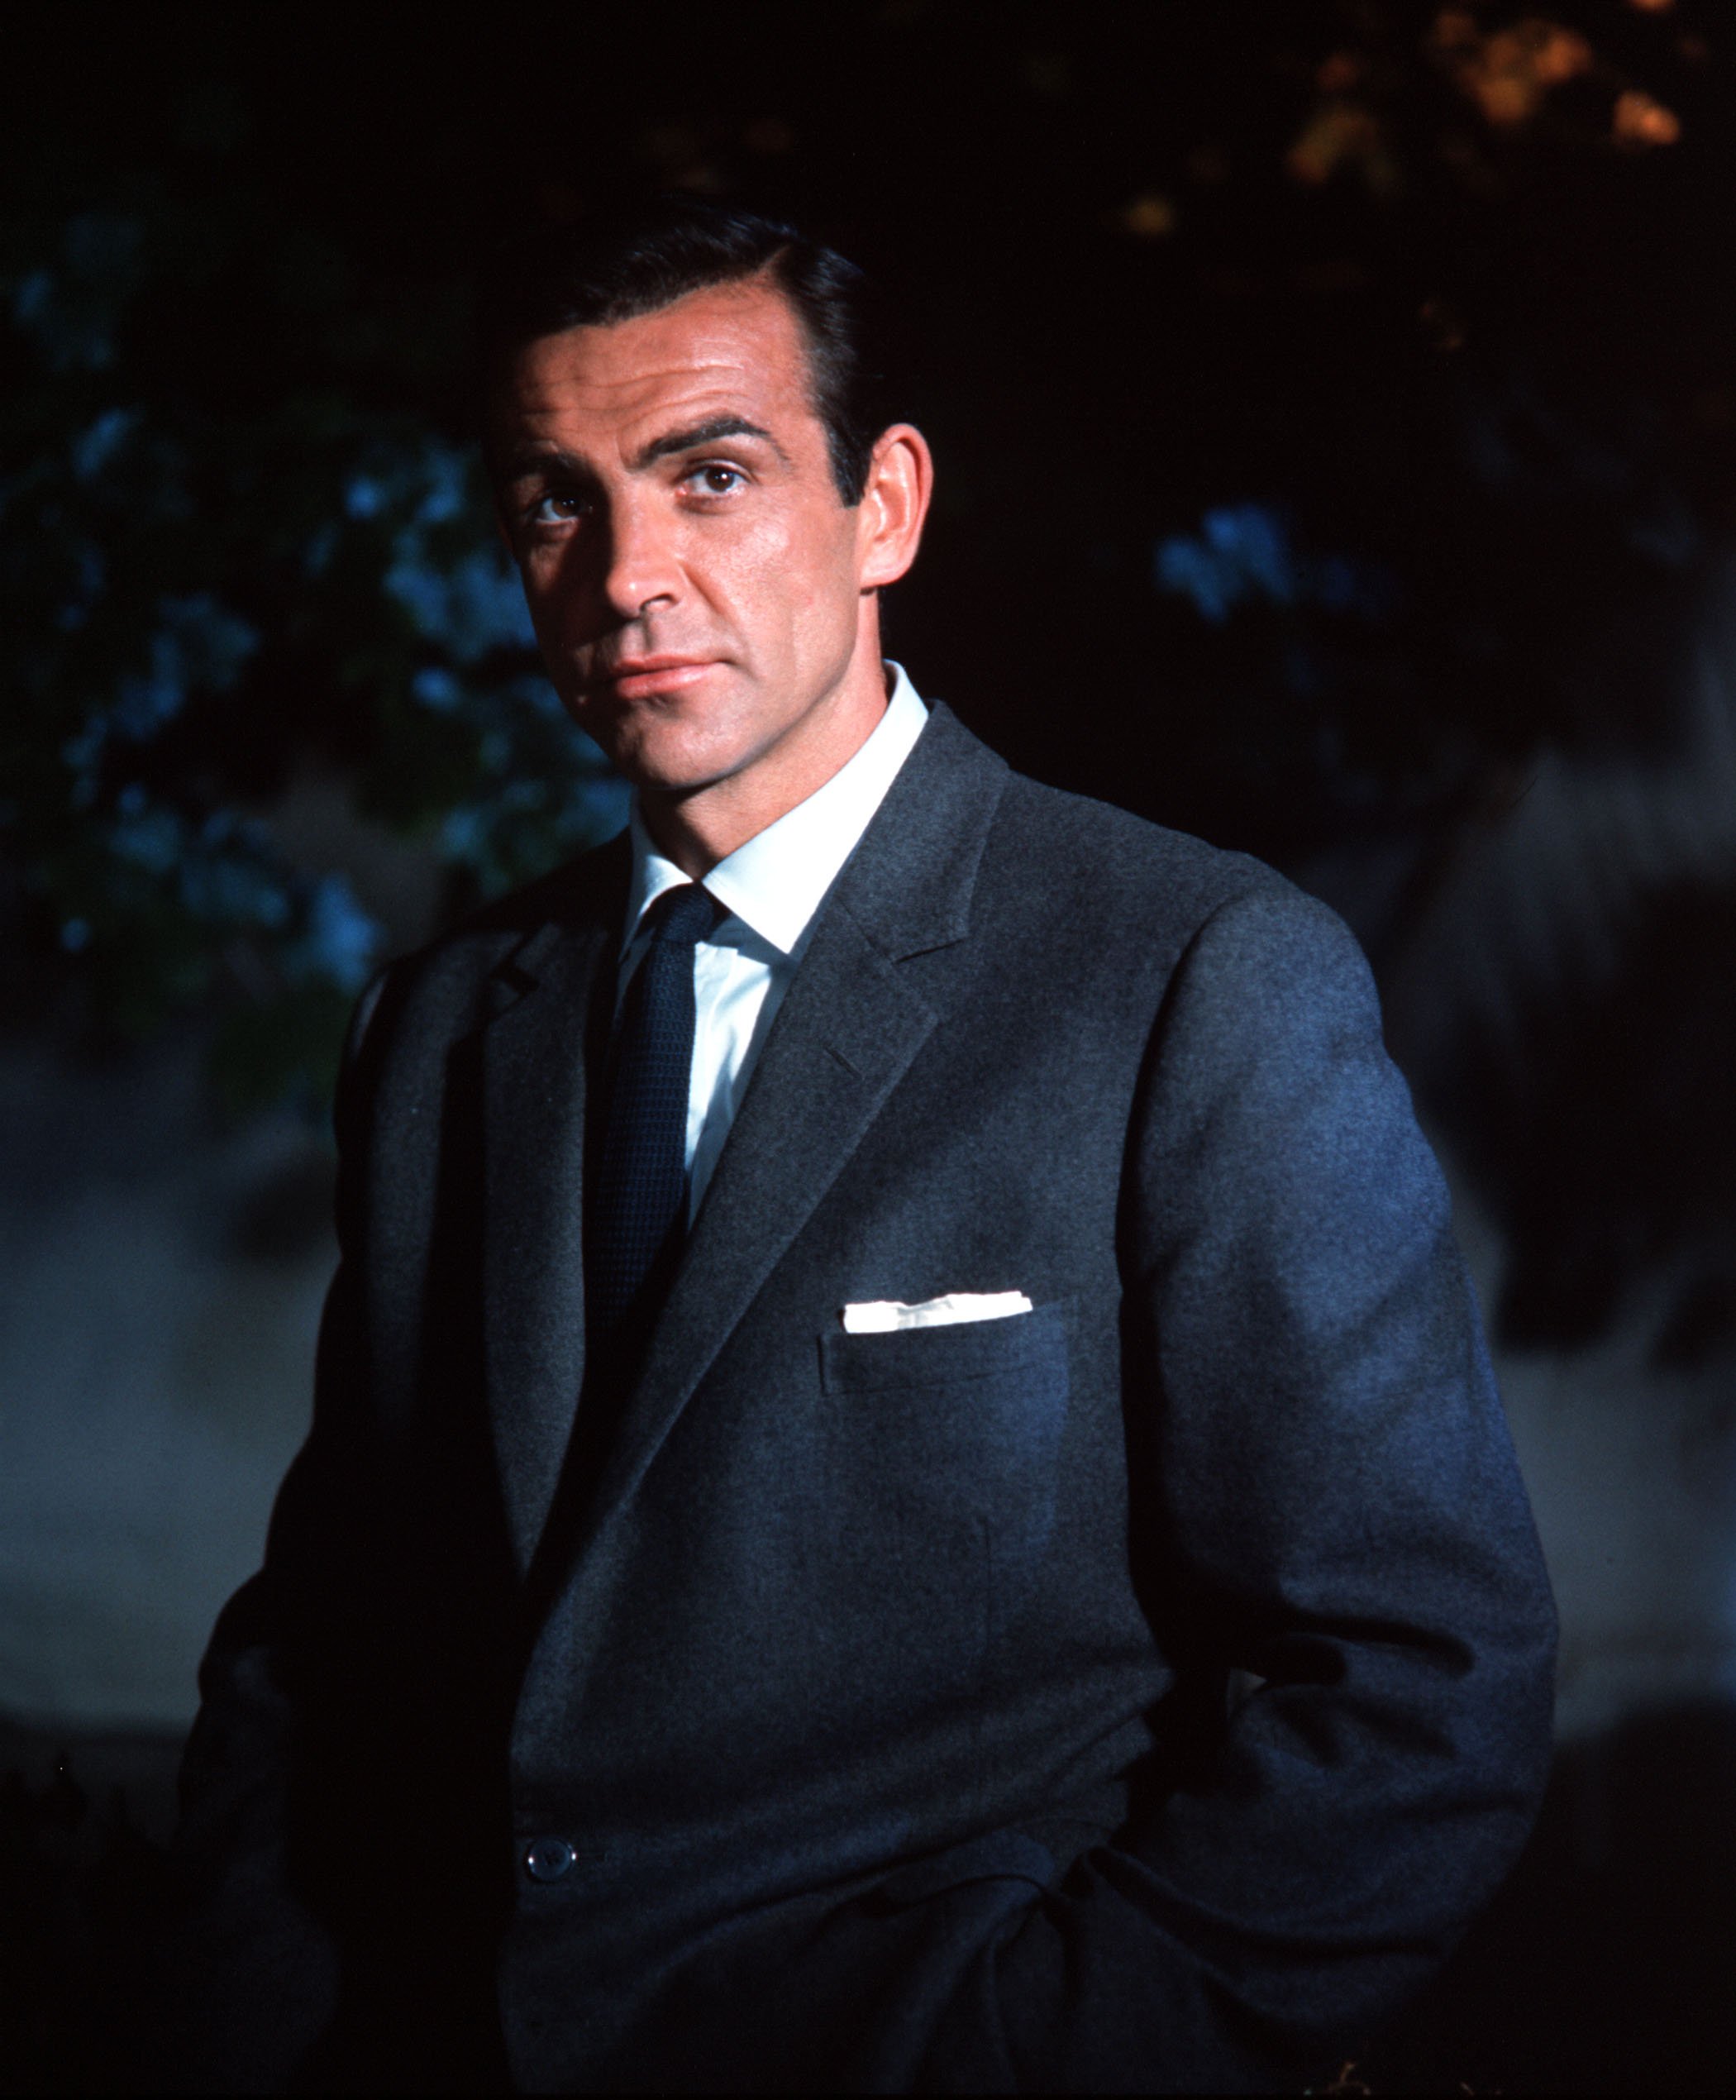 Sean Connery pictured in the role of James Bond in the film "Dr No" circa 1963. | Source: Getty Images